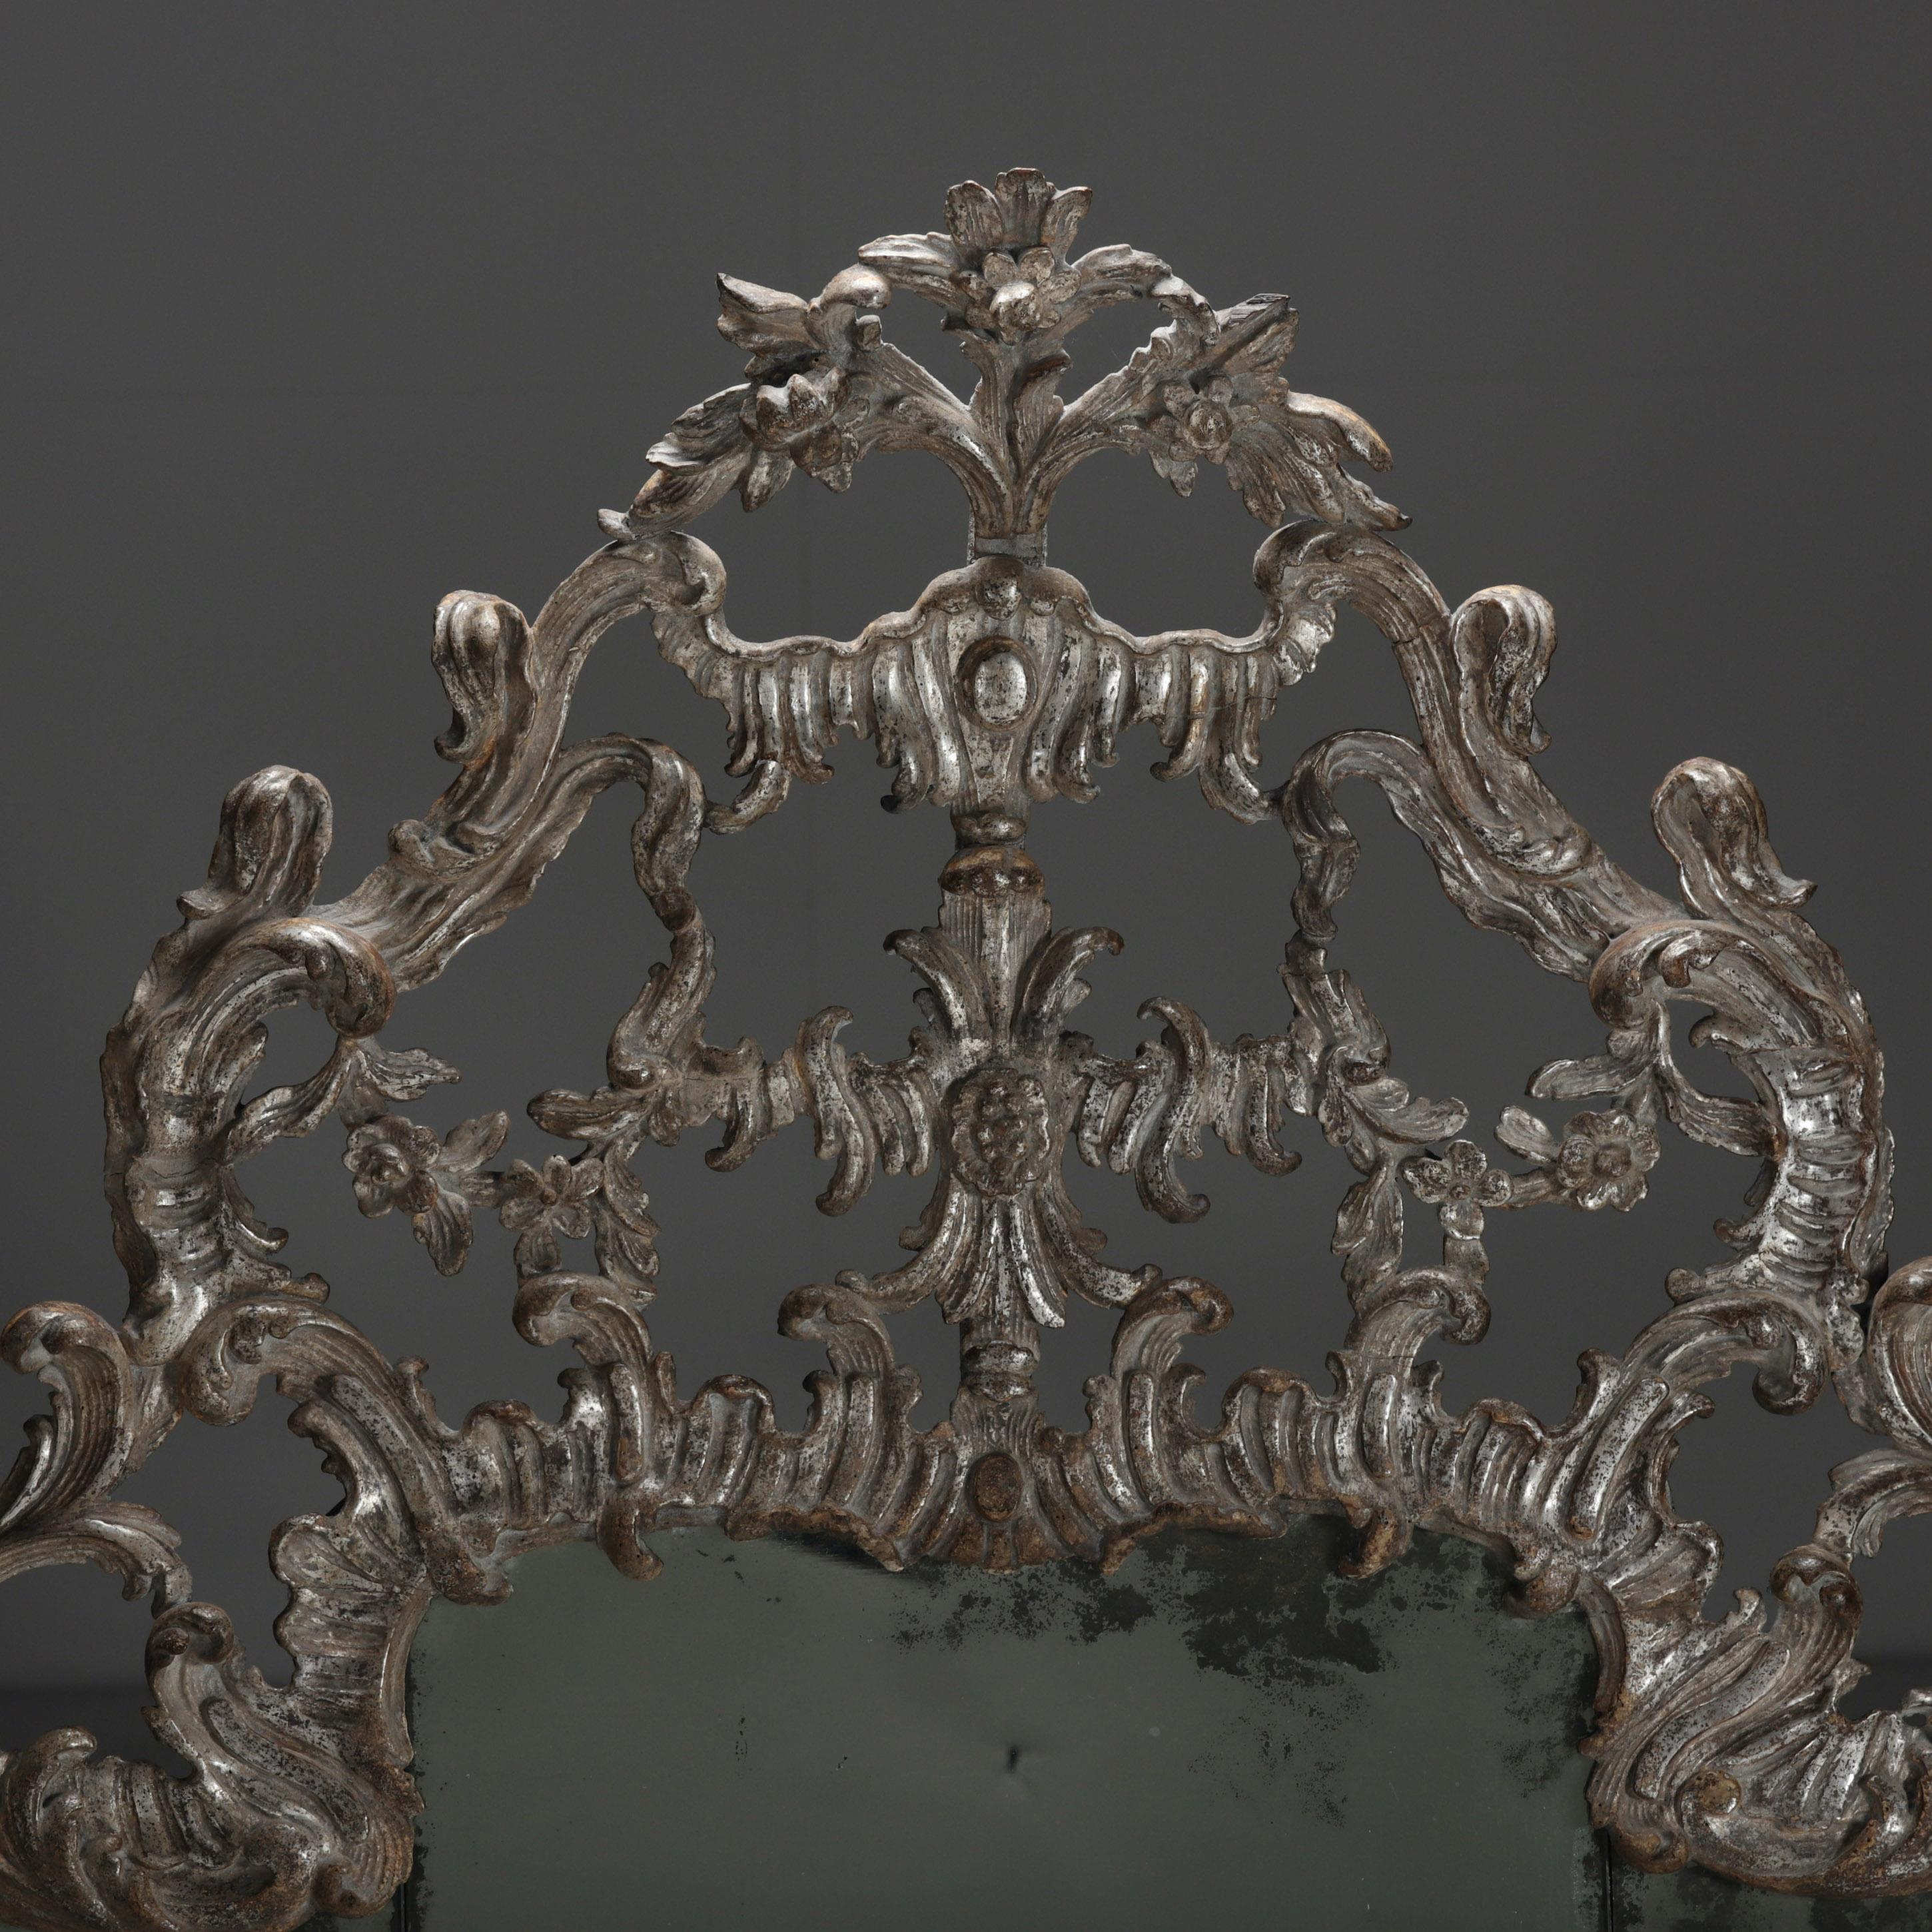 AN 18th CENTURY ITALIAN, OVERMANTEL MIRROR
With its original foxed mirror plates, lightly cleaned to reveal its original silver leaf.
